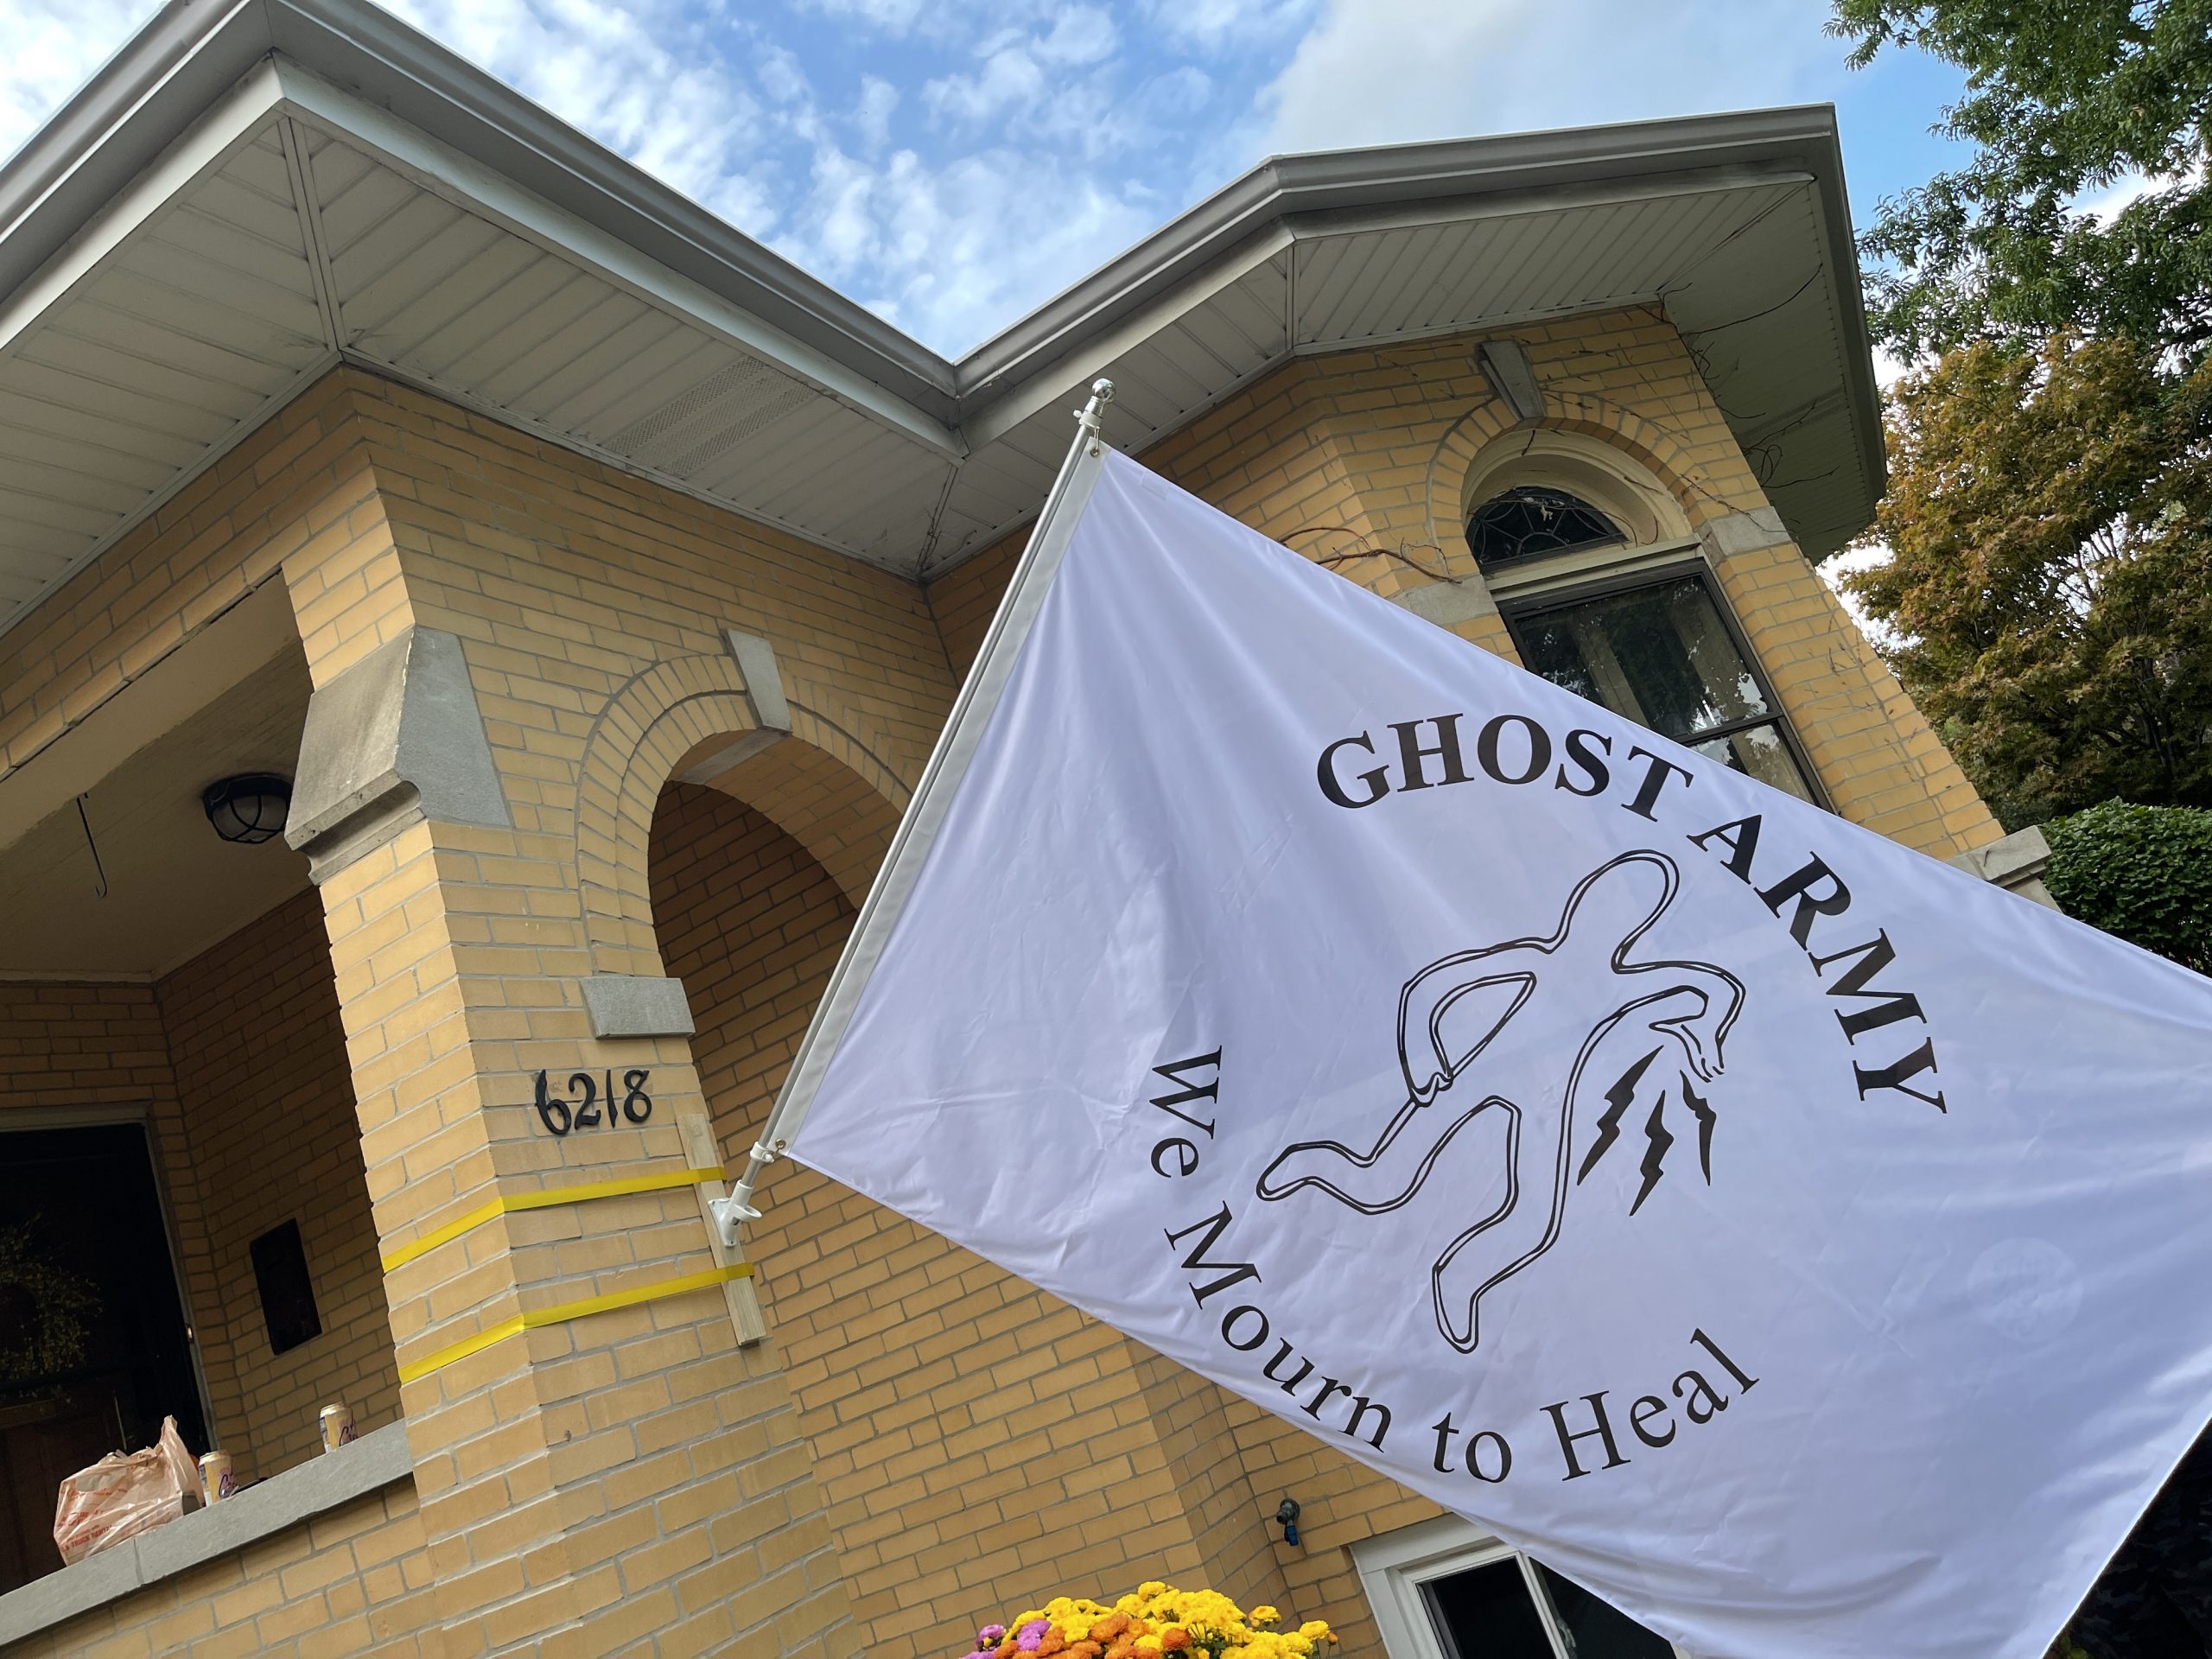 Featured image: Michael Workman, “Ghost Army” flag 2021. A white flag depicting an outline of a figure with the words “GHOST ARMY/We Mourn to Heal” hangs from the front entryway. Courtesy of the artist.